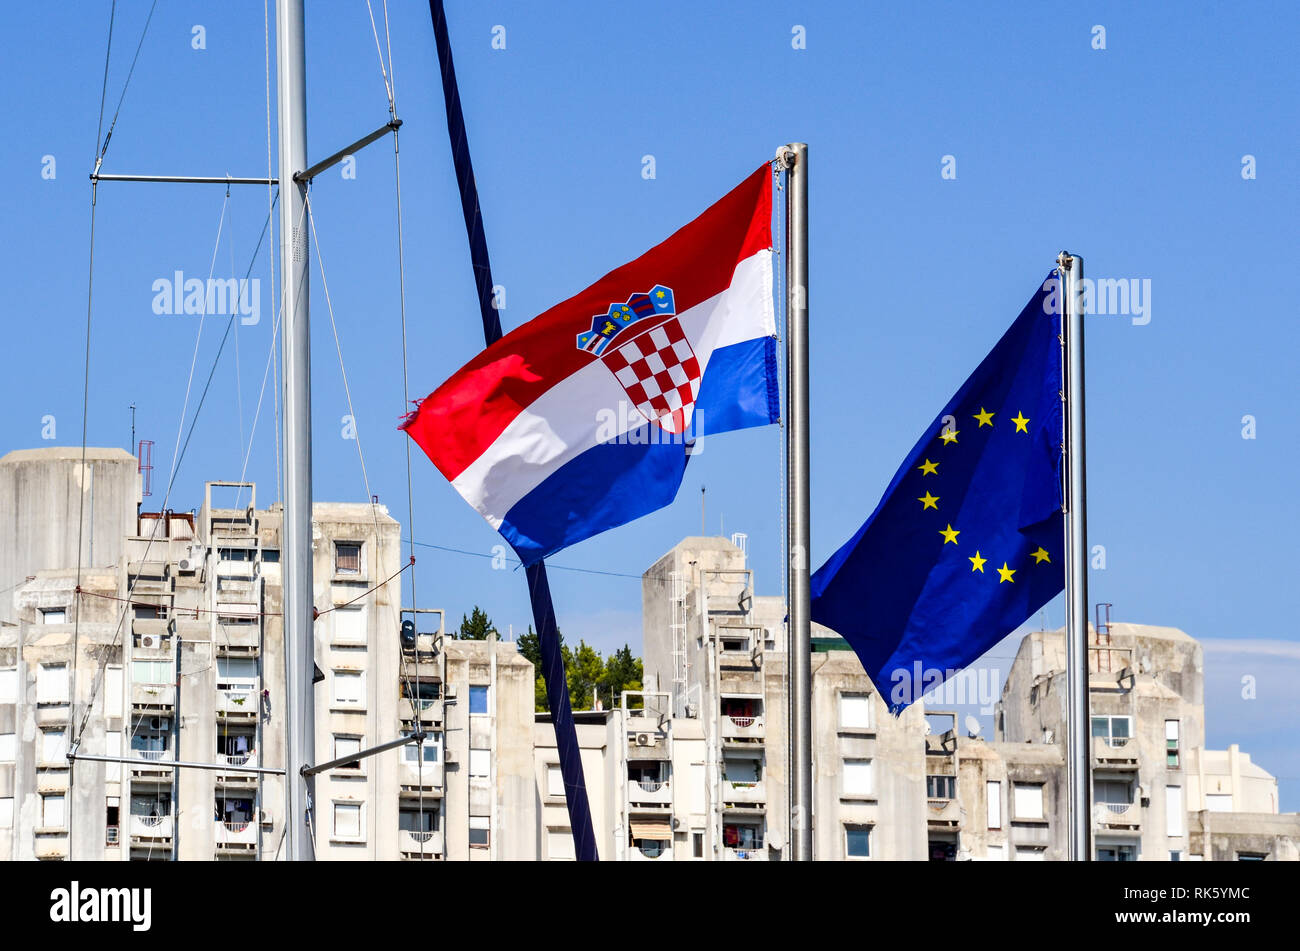 Croatian and European flags in the Coastal town of Ploce (Ploče), Croatia. It is the primary seaport used by Bosnia and Herzegovina. Stock Photo